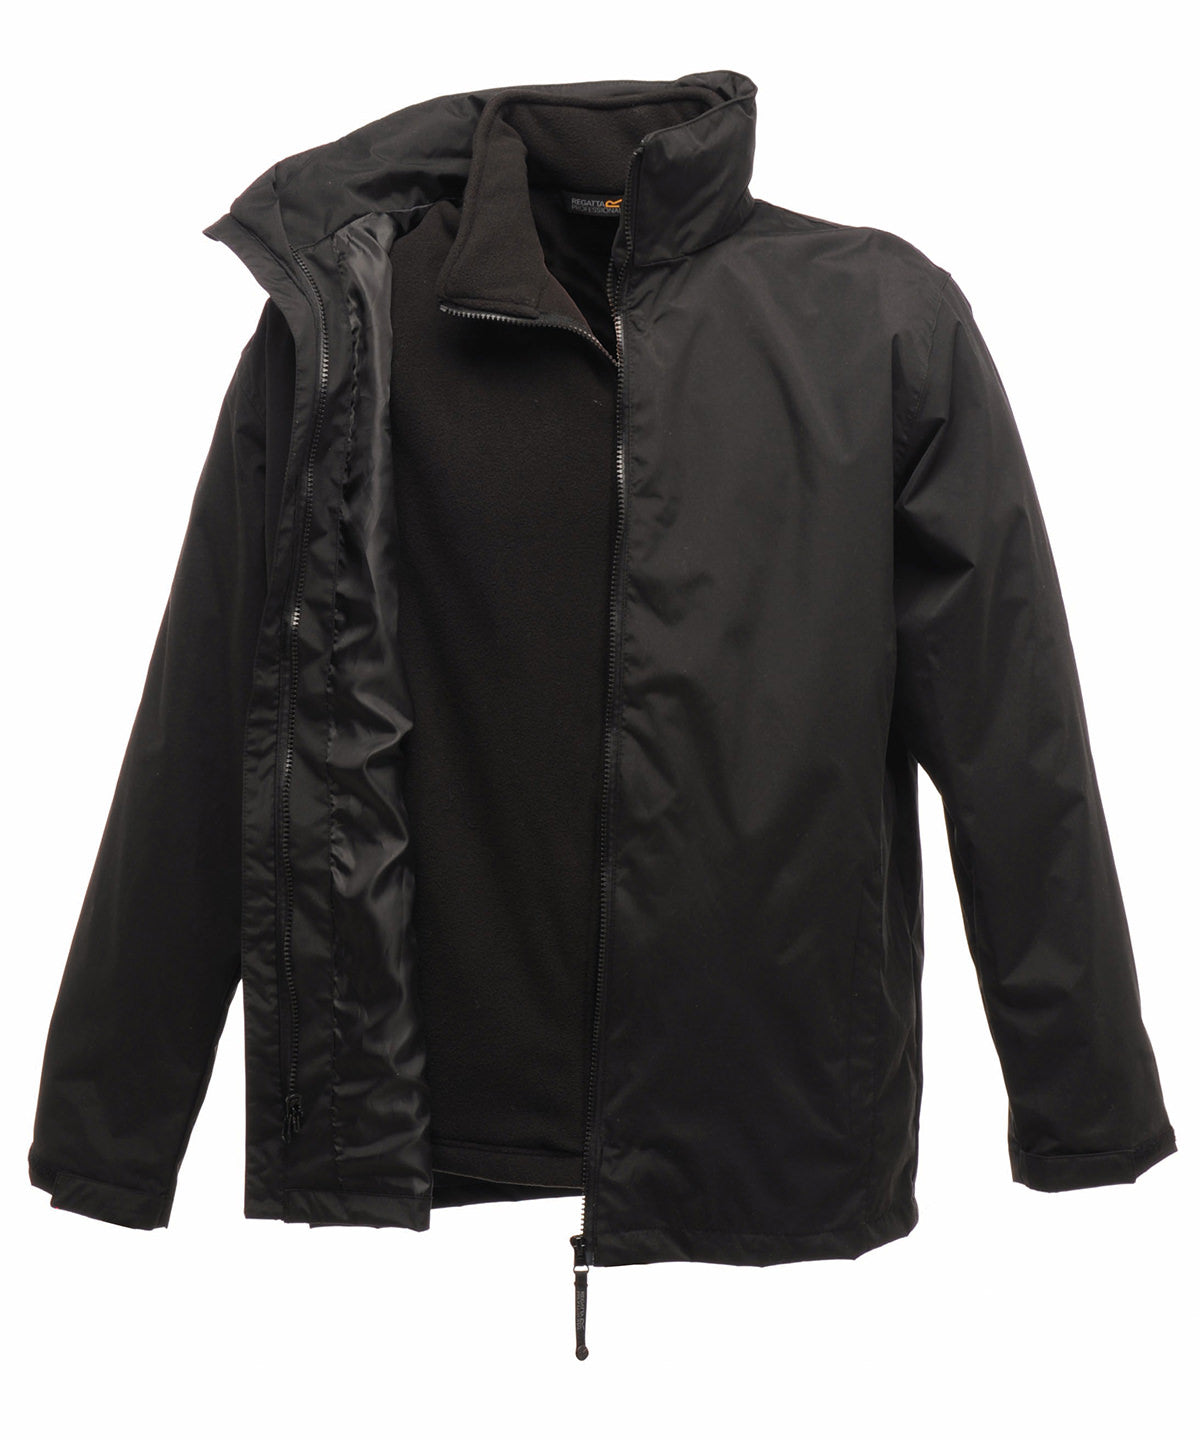 Classic 3-in-1 jacket | Black